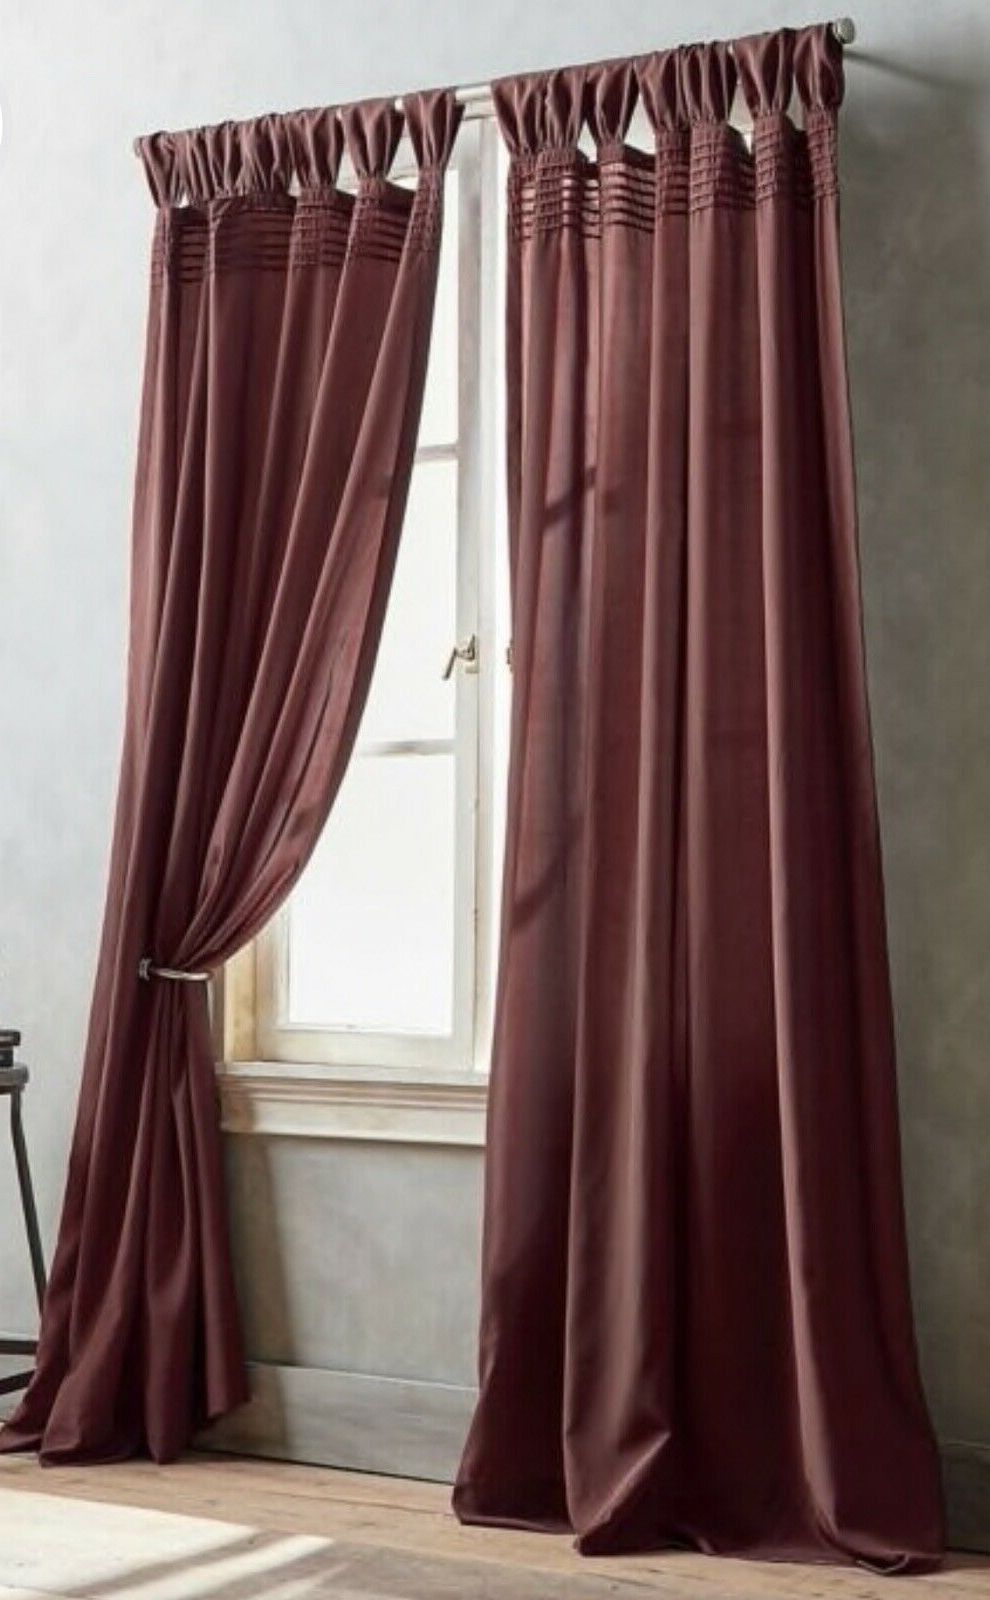 Trendy 3 New Dkny City Edition Cream Window Curtain Tab Top Pleated Panels 50 X 95” With Regard To Vue Elements Priya Tab Top Window Curtains (View 20 of 20)